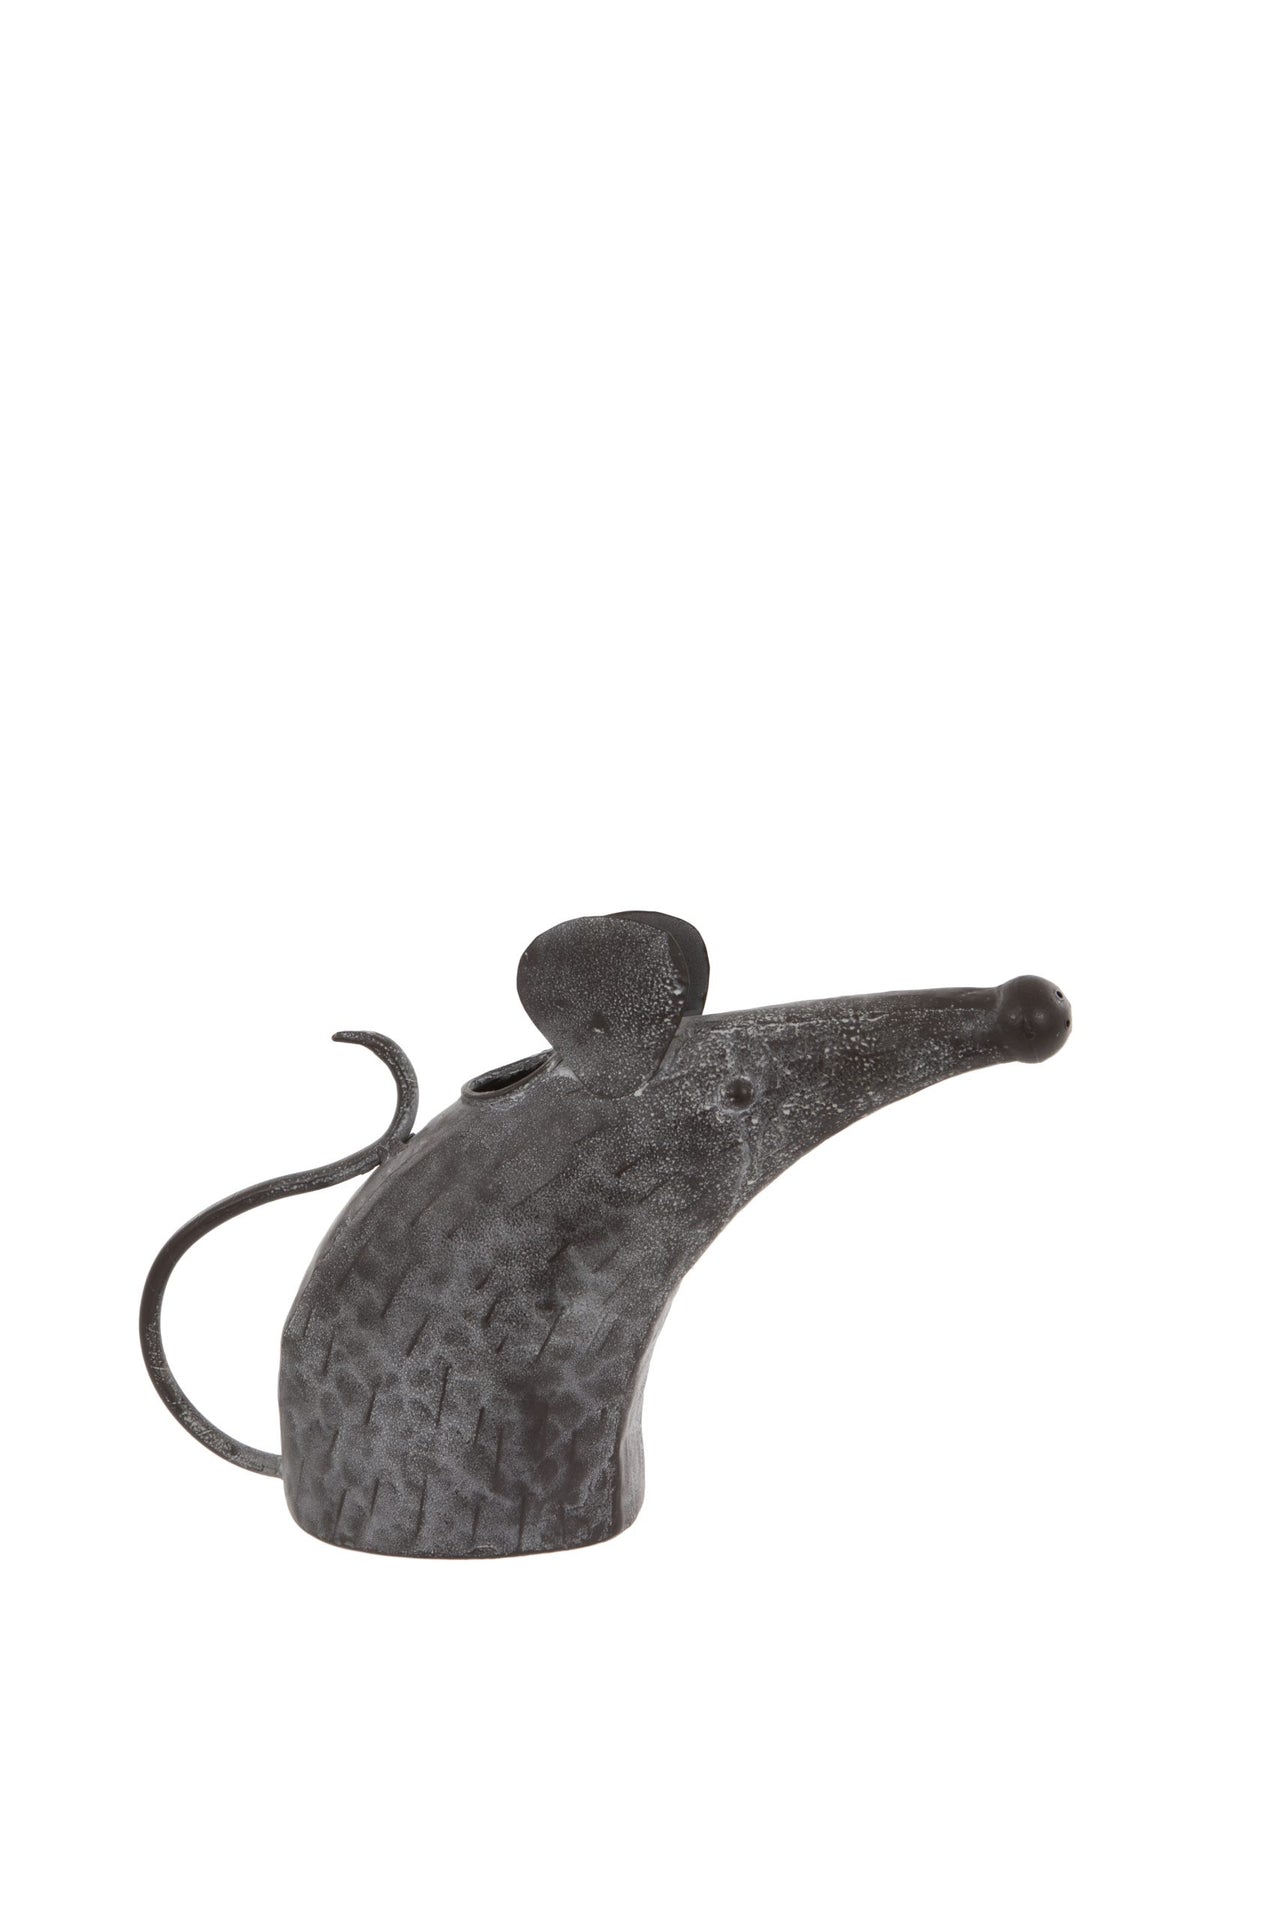 London Ornaments Mouse Watering Can